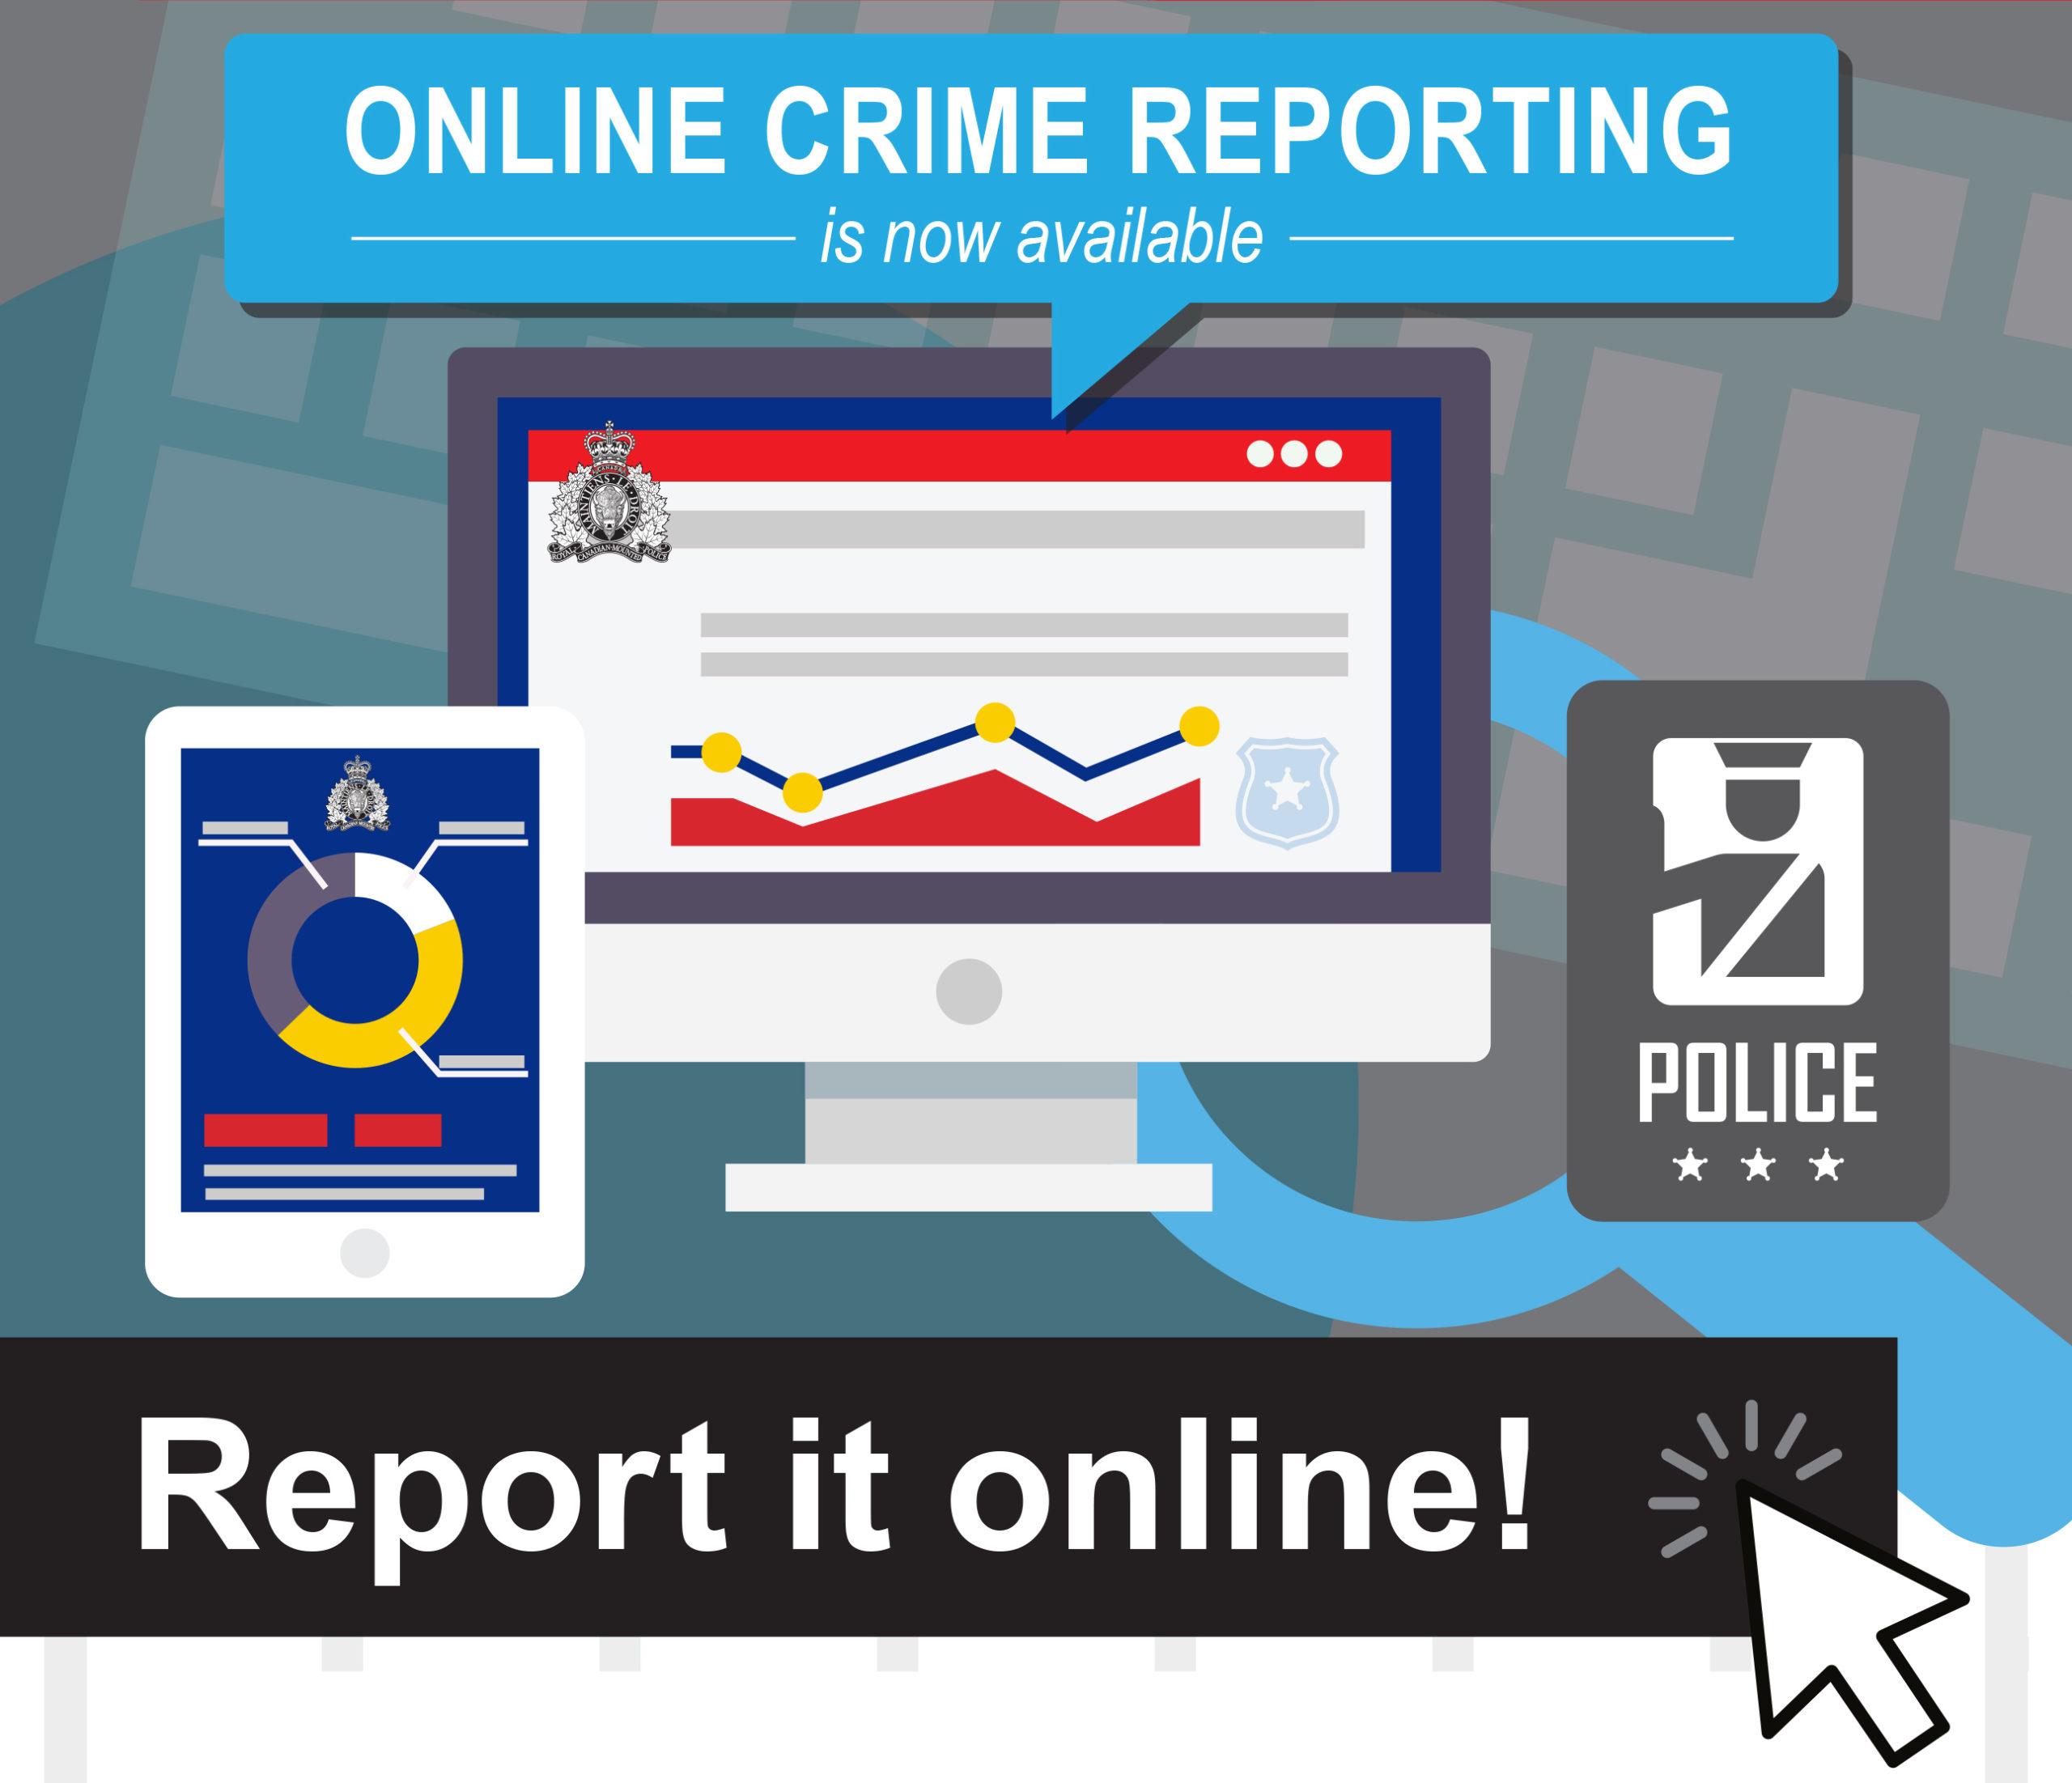 online crime reporting system research paper